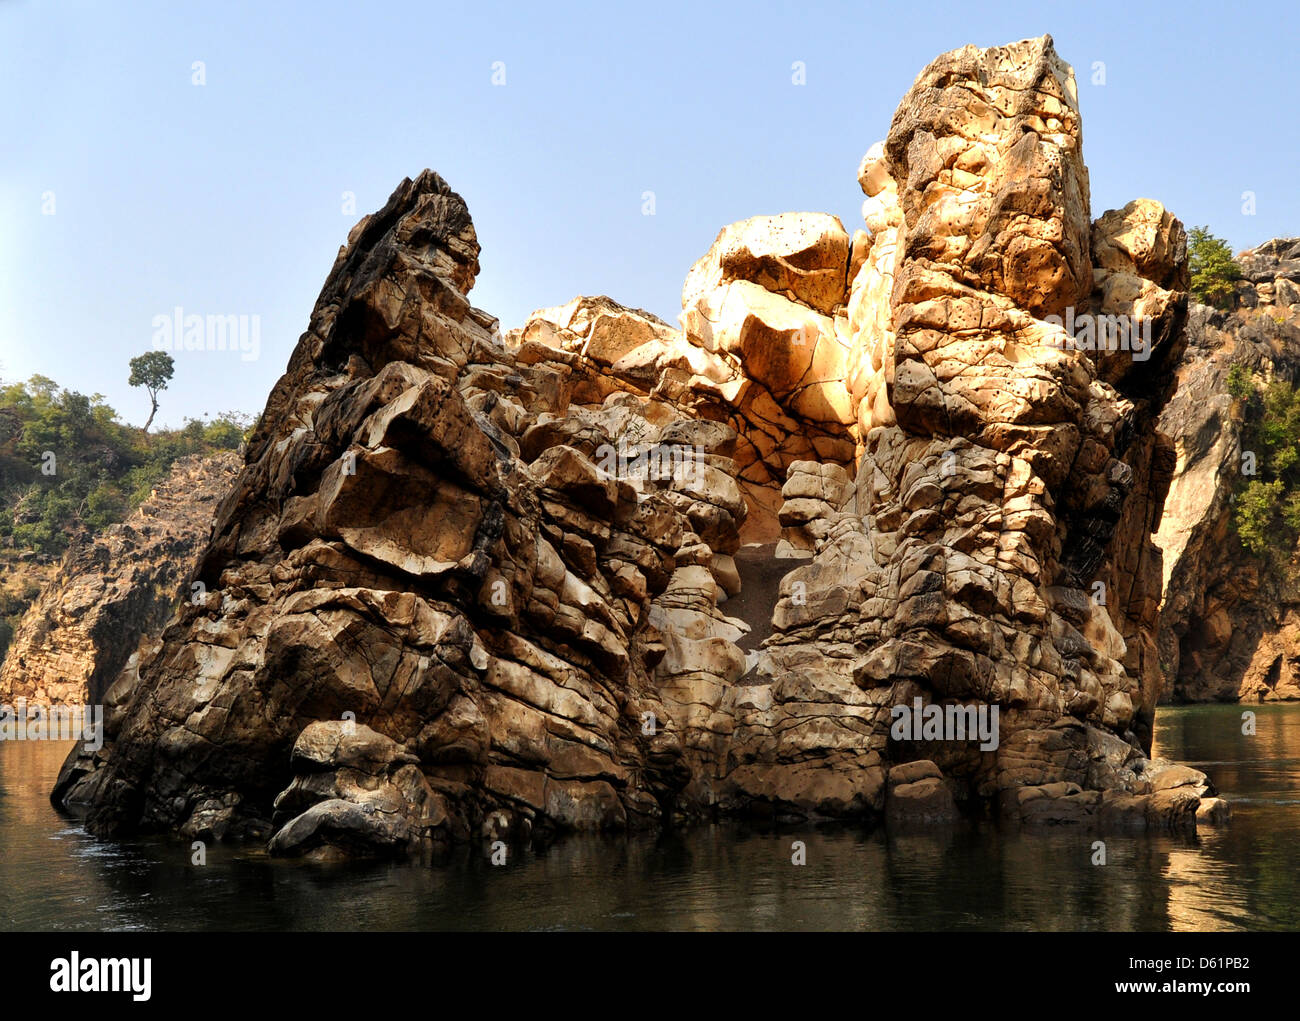 River Narmada flows through a canyon or gorge of Marble rocks in Bhedaghat in Jabalpur district of Indian Madhya Pradesh state Stock Photo